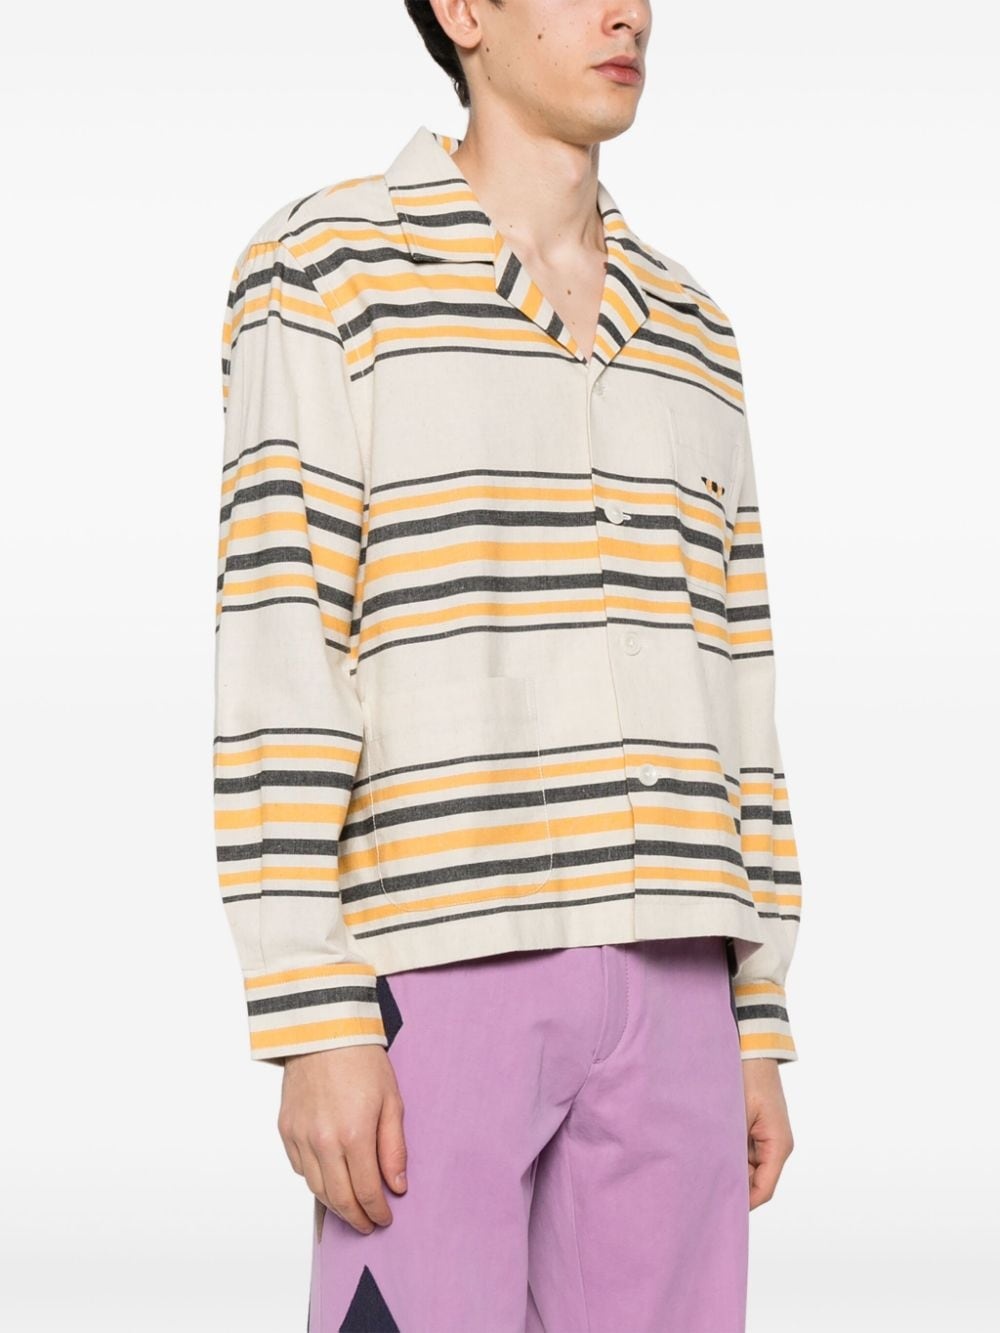 embroidered-logo striped shirt - 3